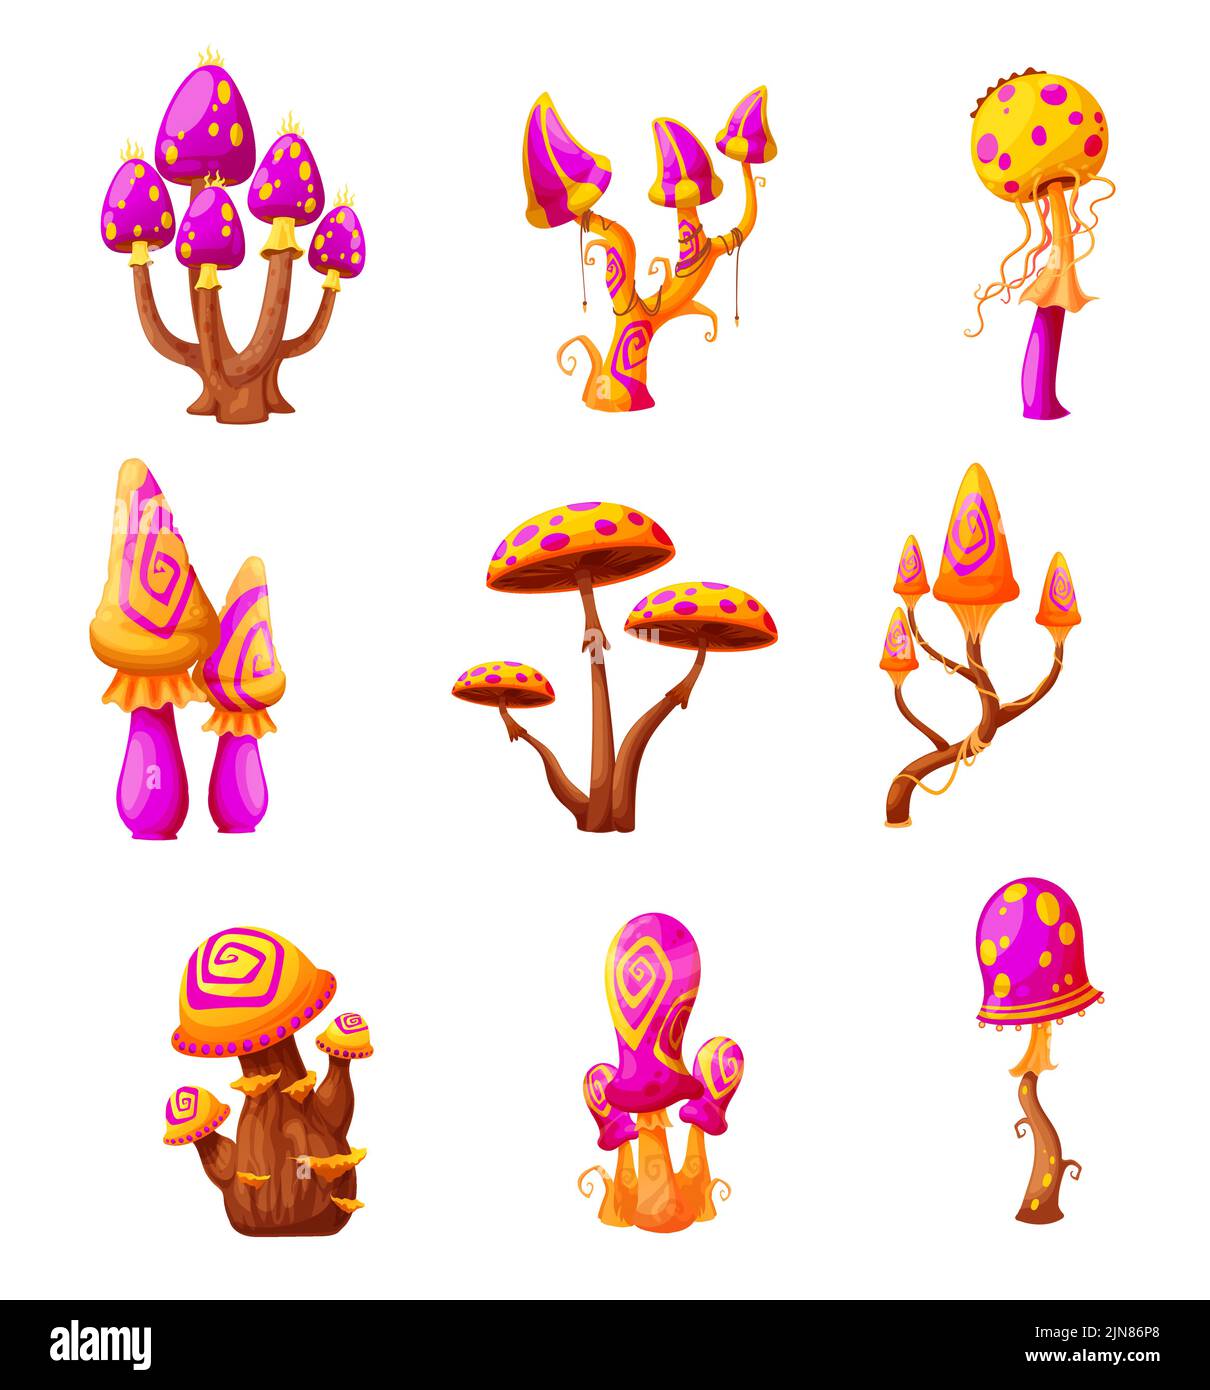 Fantasy fairy magic mushrooms, cartoon vector fungi. Isolated alien unusual plants with bizarre stipes and odd caps. Natural fairytale toadstools game assets, hallucinogenic poisonous fungus set Stock Vector